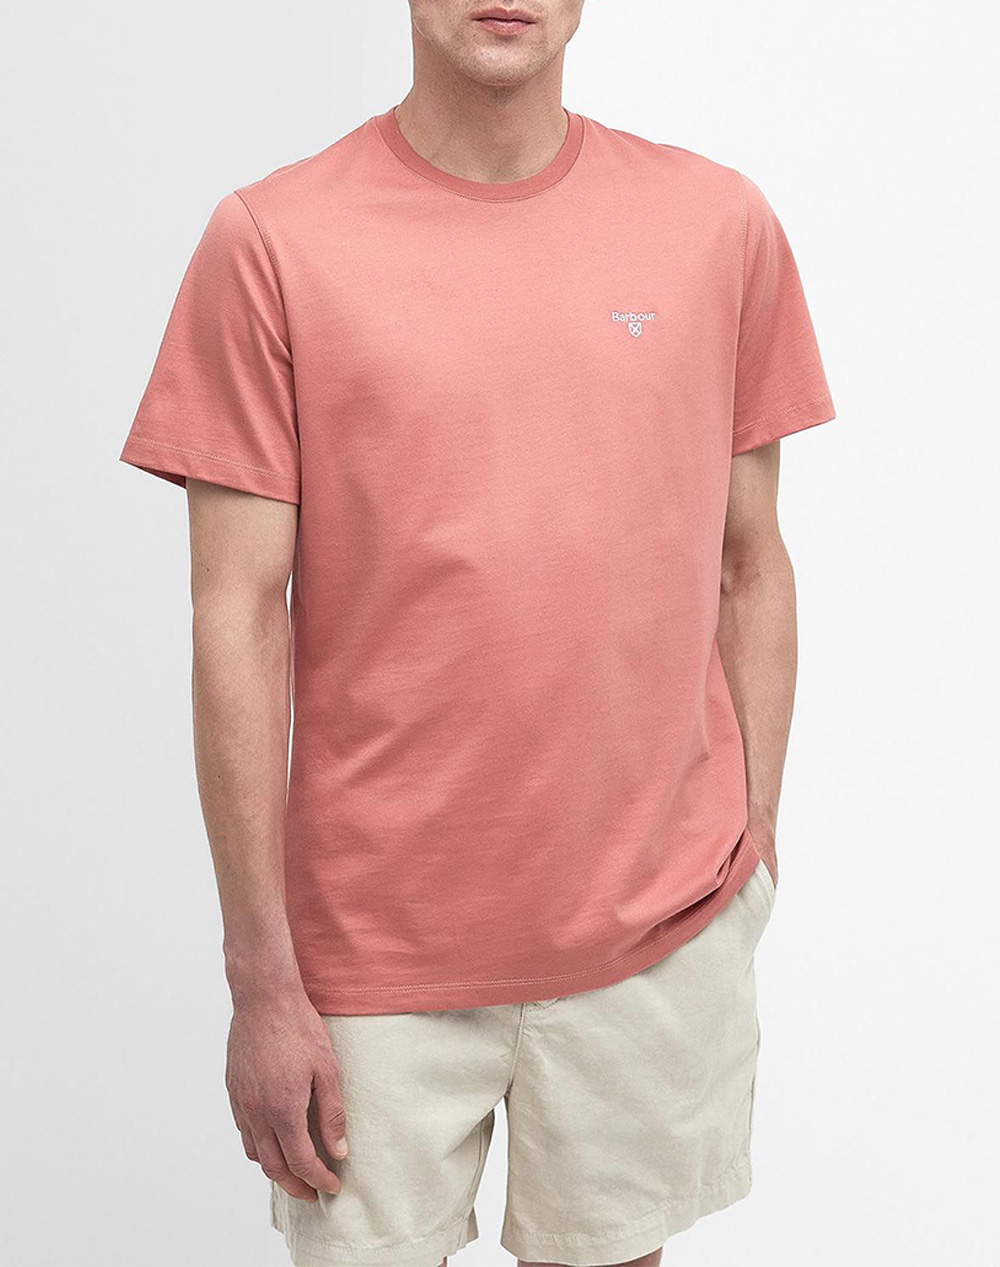 BARBOUR ΜΠΛΟΥΖΑ T-SHIRT Κ/Μ ESSENTIAL SPORTS TEE MTS0331-BRPI55.1 Coral 3820ABARB3400047_XR28552